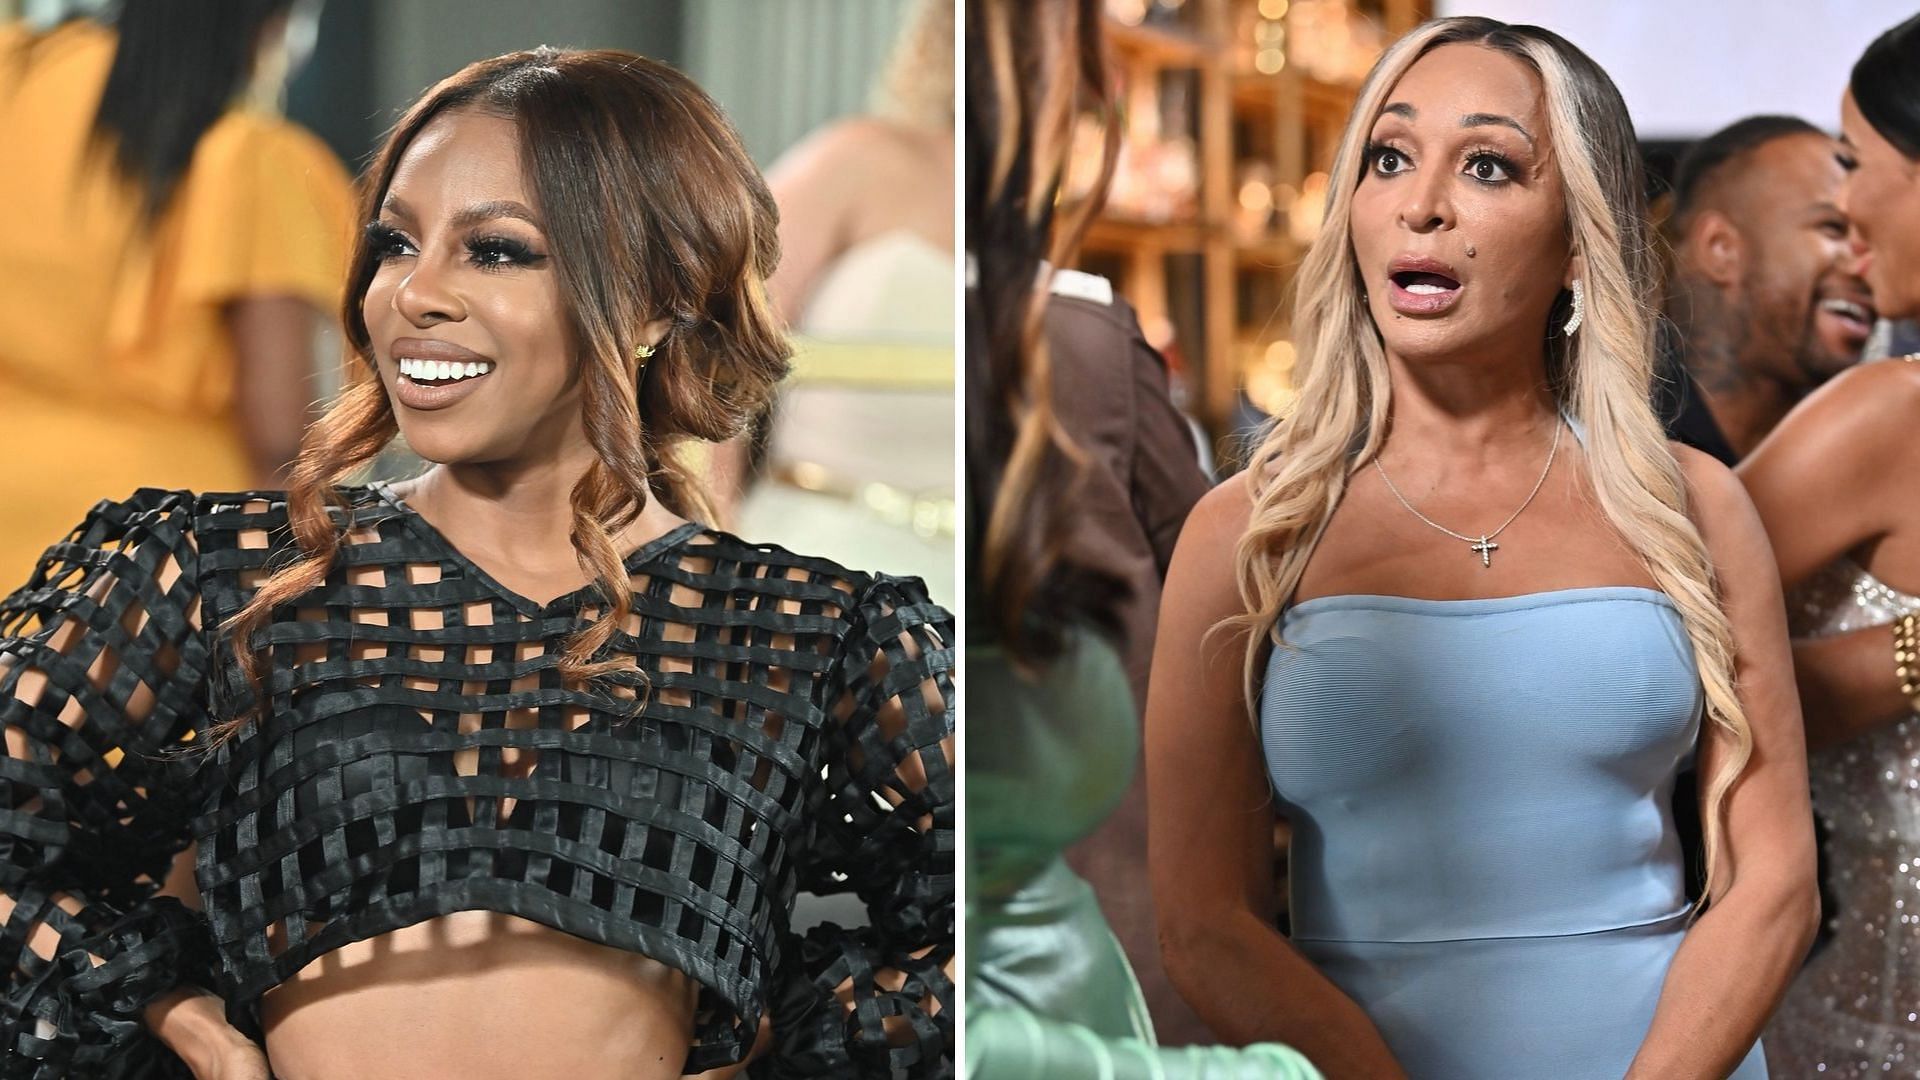 RHOP Season 7 airs its finale episode this Sunday